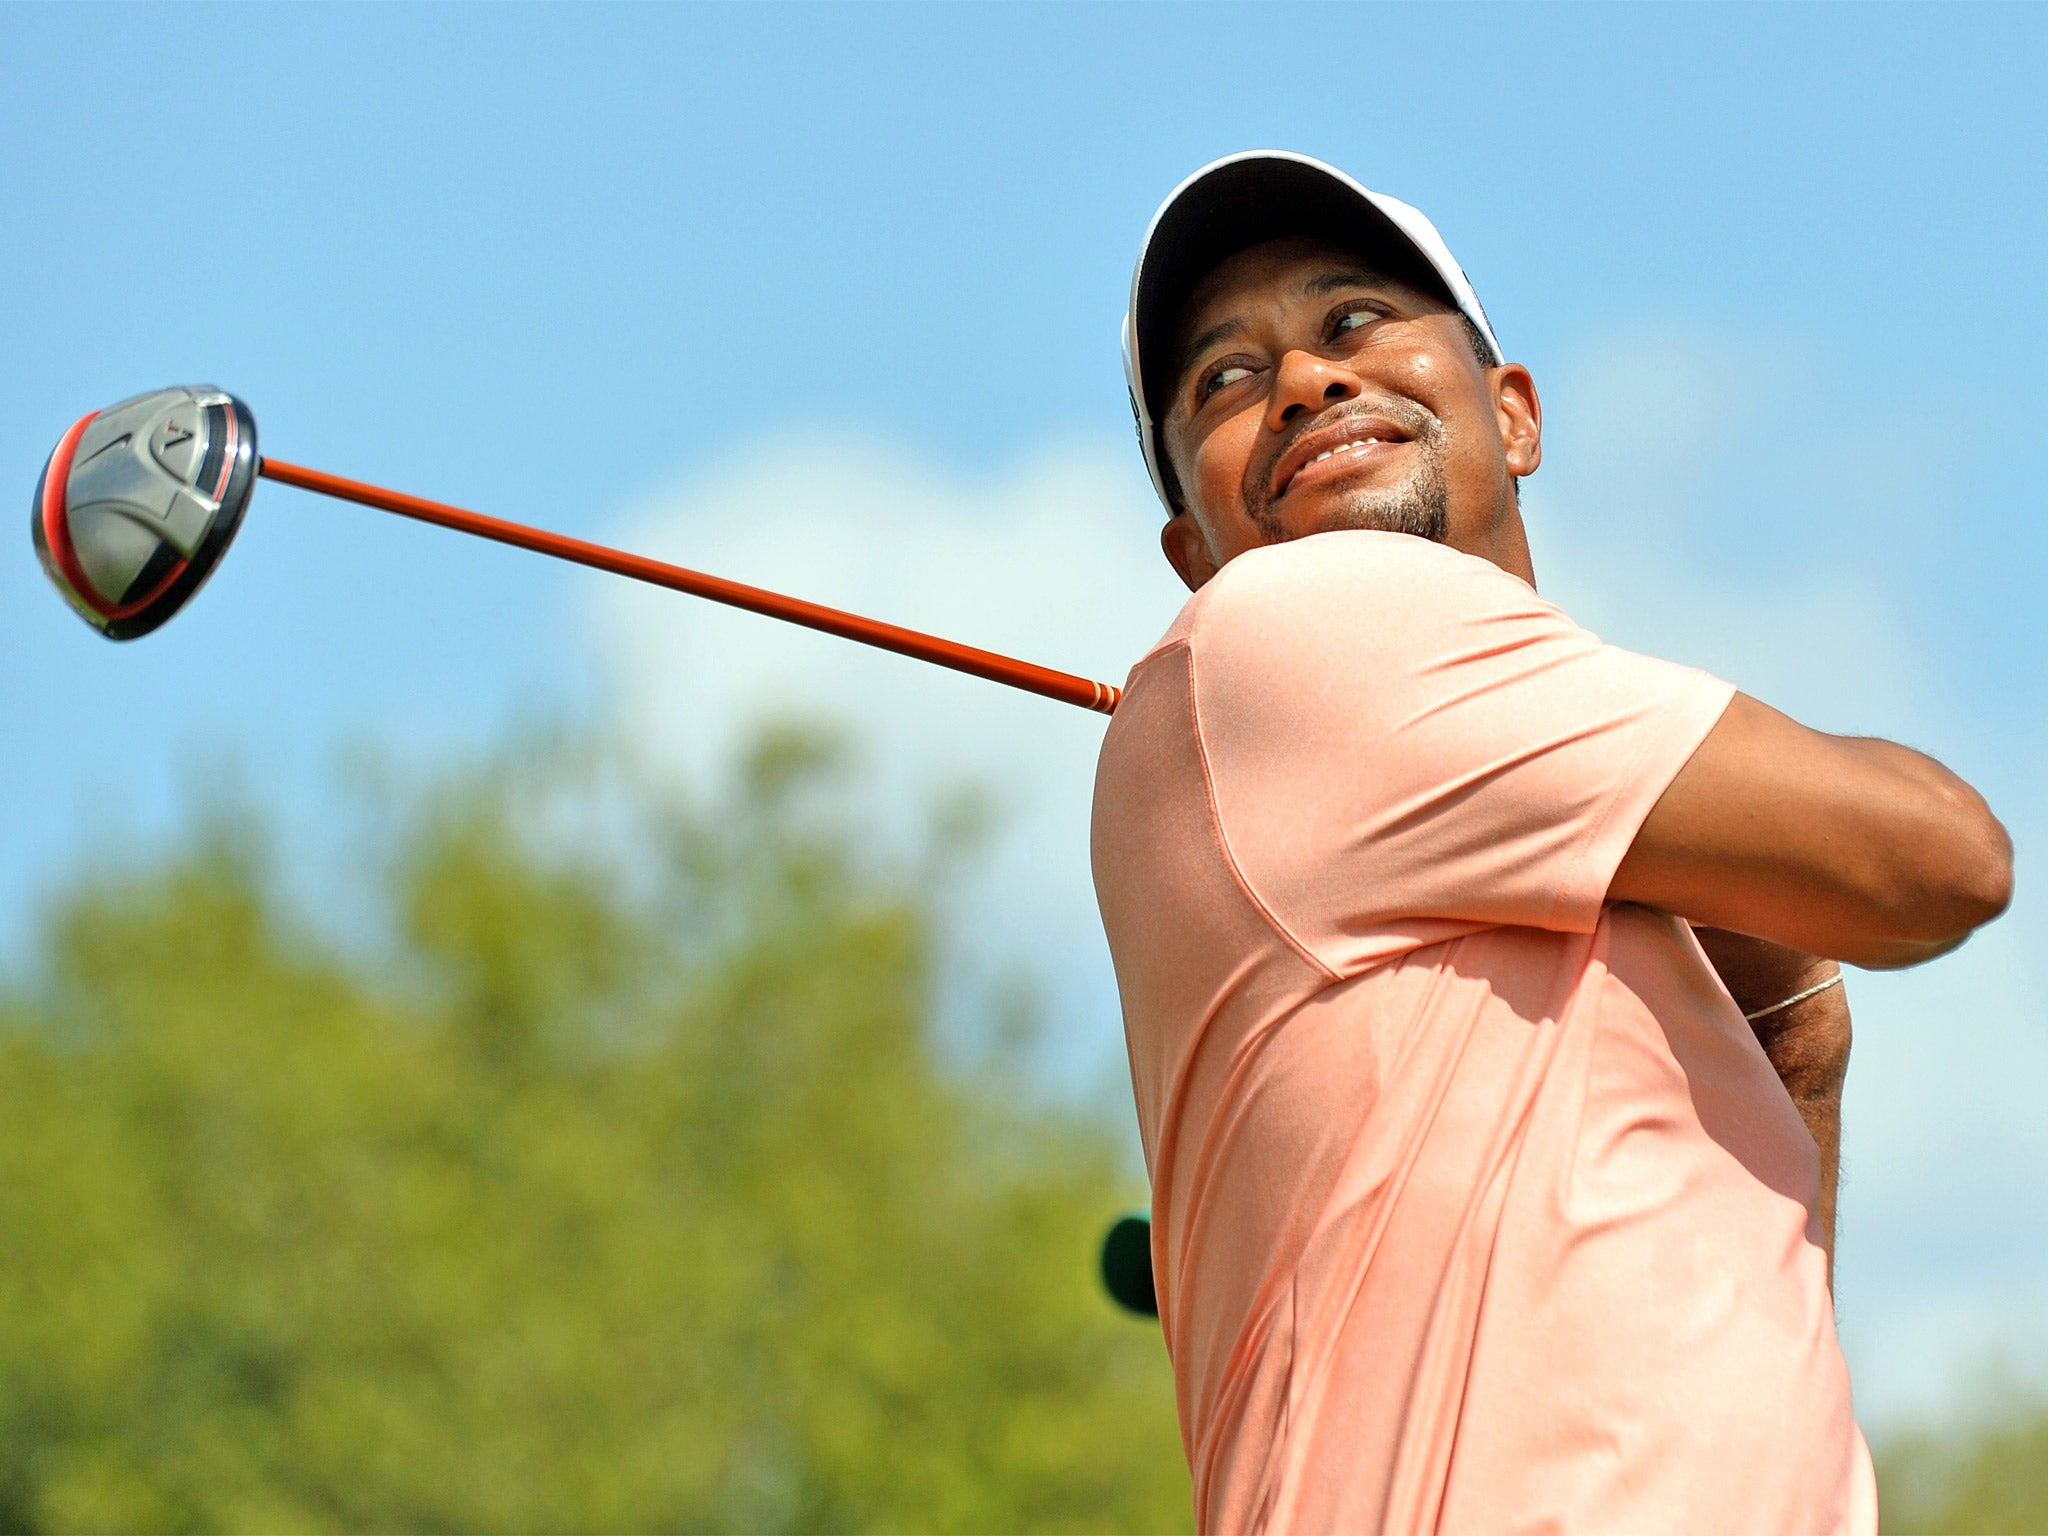 Woods has 14 majors to his name but has sights set on the magic mark of 19